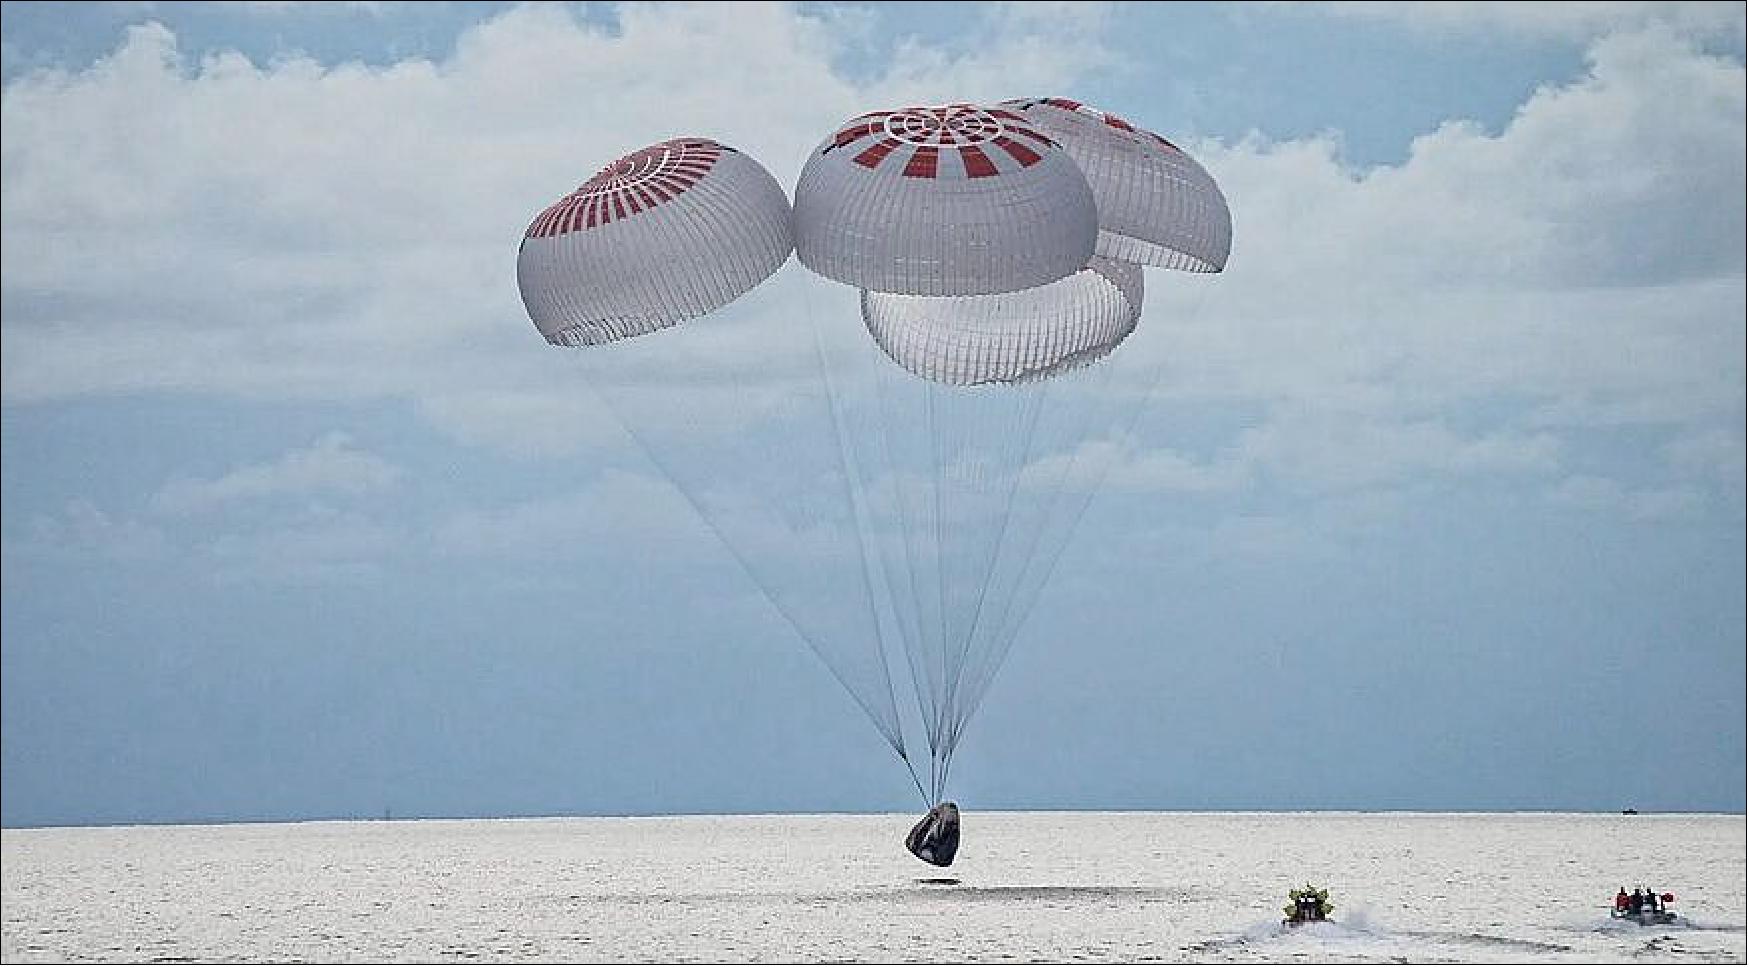 Figure 6: The Crew Dragon spacecraft Resilience splashes down in the Atlantic Ocean off the Florida coast Sept. 18 at the end of the Inspiration4 mission (image credit: Inspiration4)